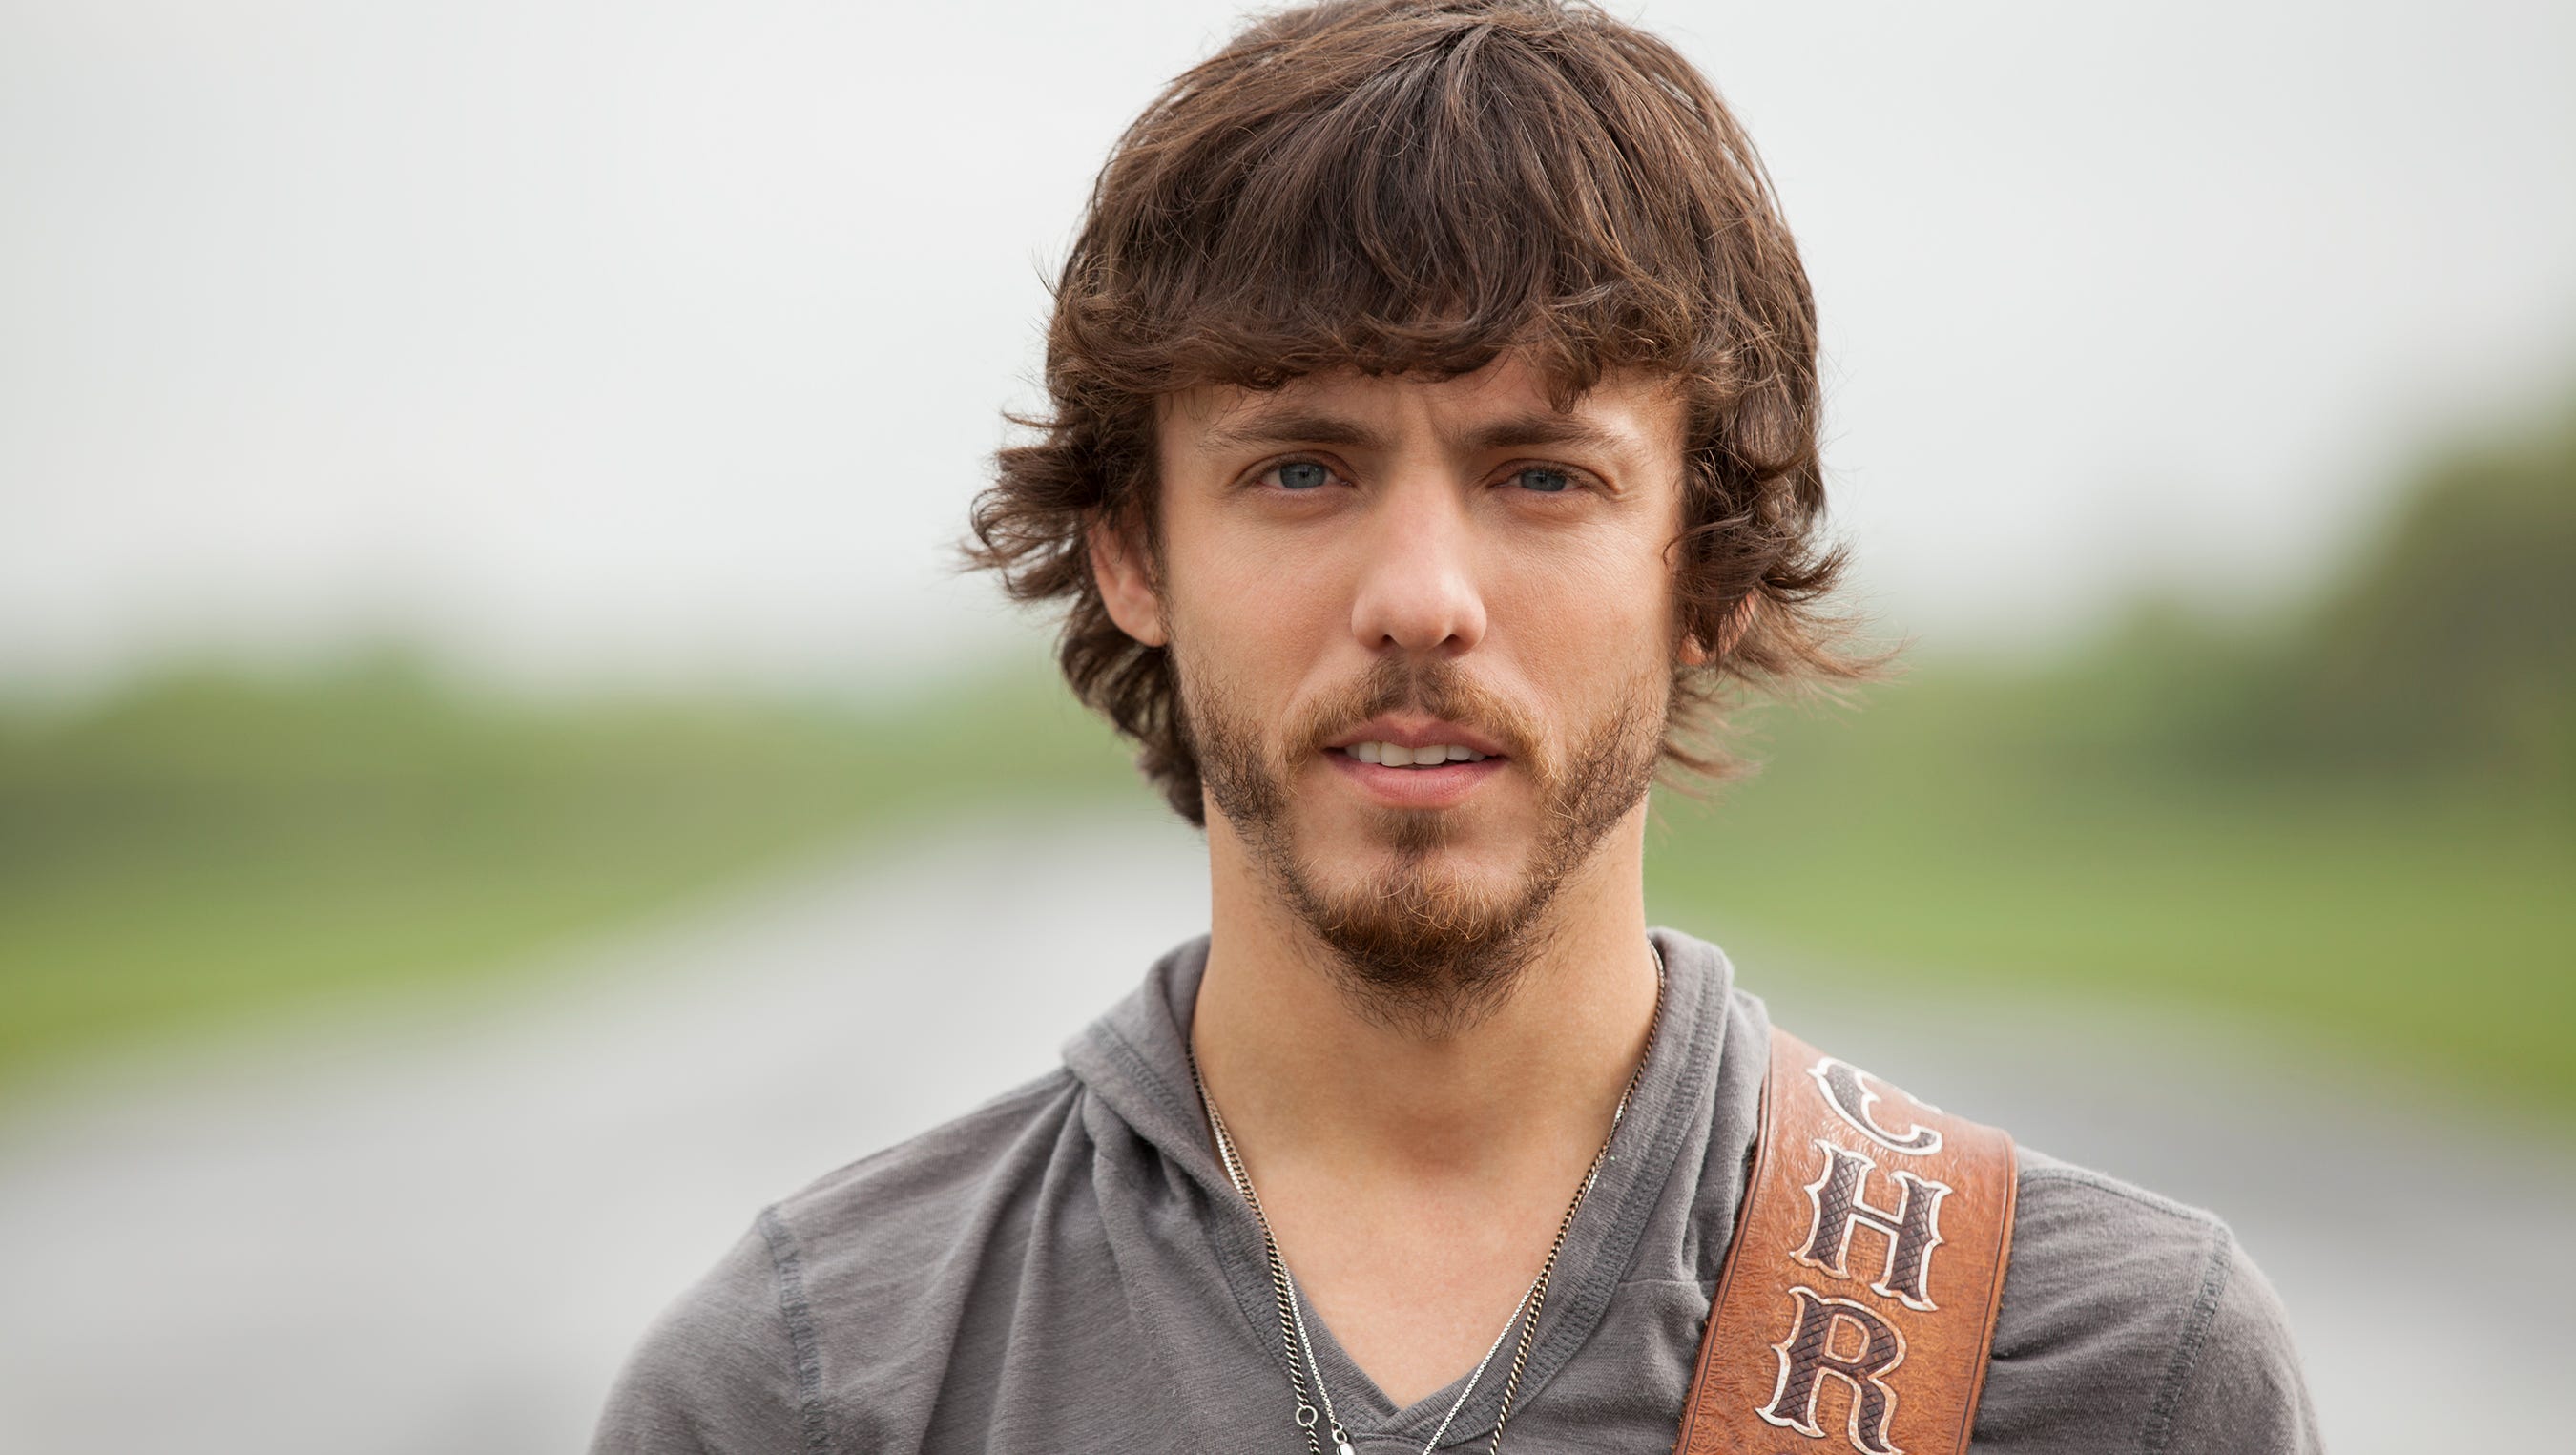 The 38-year old son of father (?) and mother(?) Chris Janson in 2024 photo. Chris Janson earned a  million dollar salary - leaving the net worth at 0.8 million in 2024